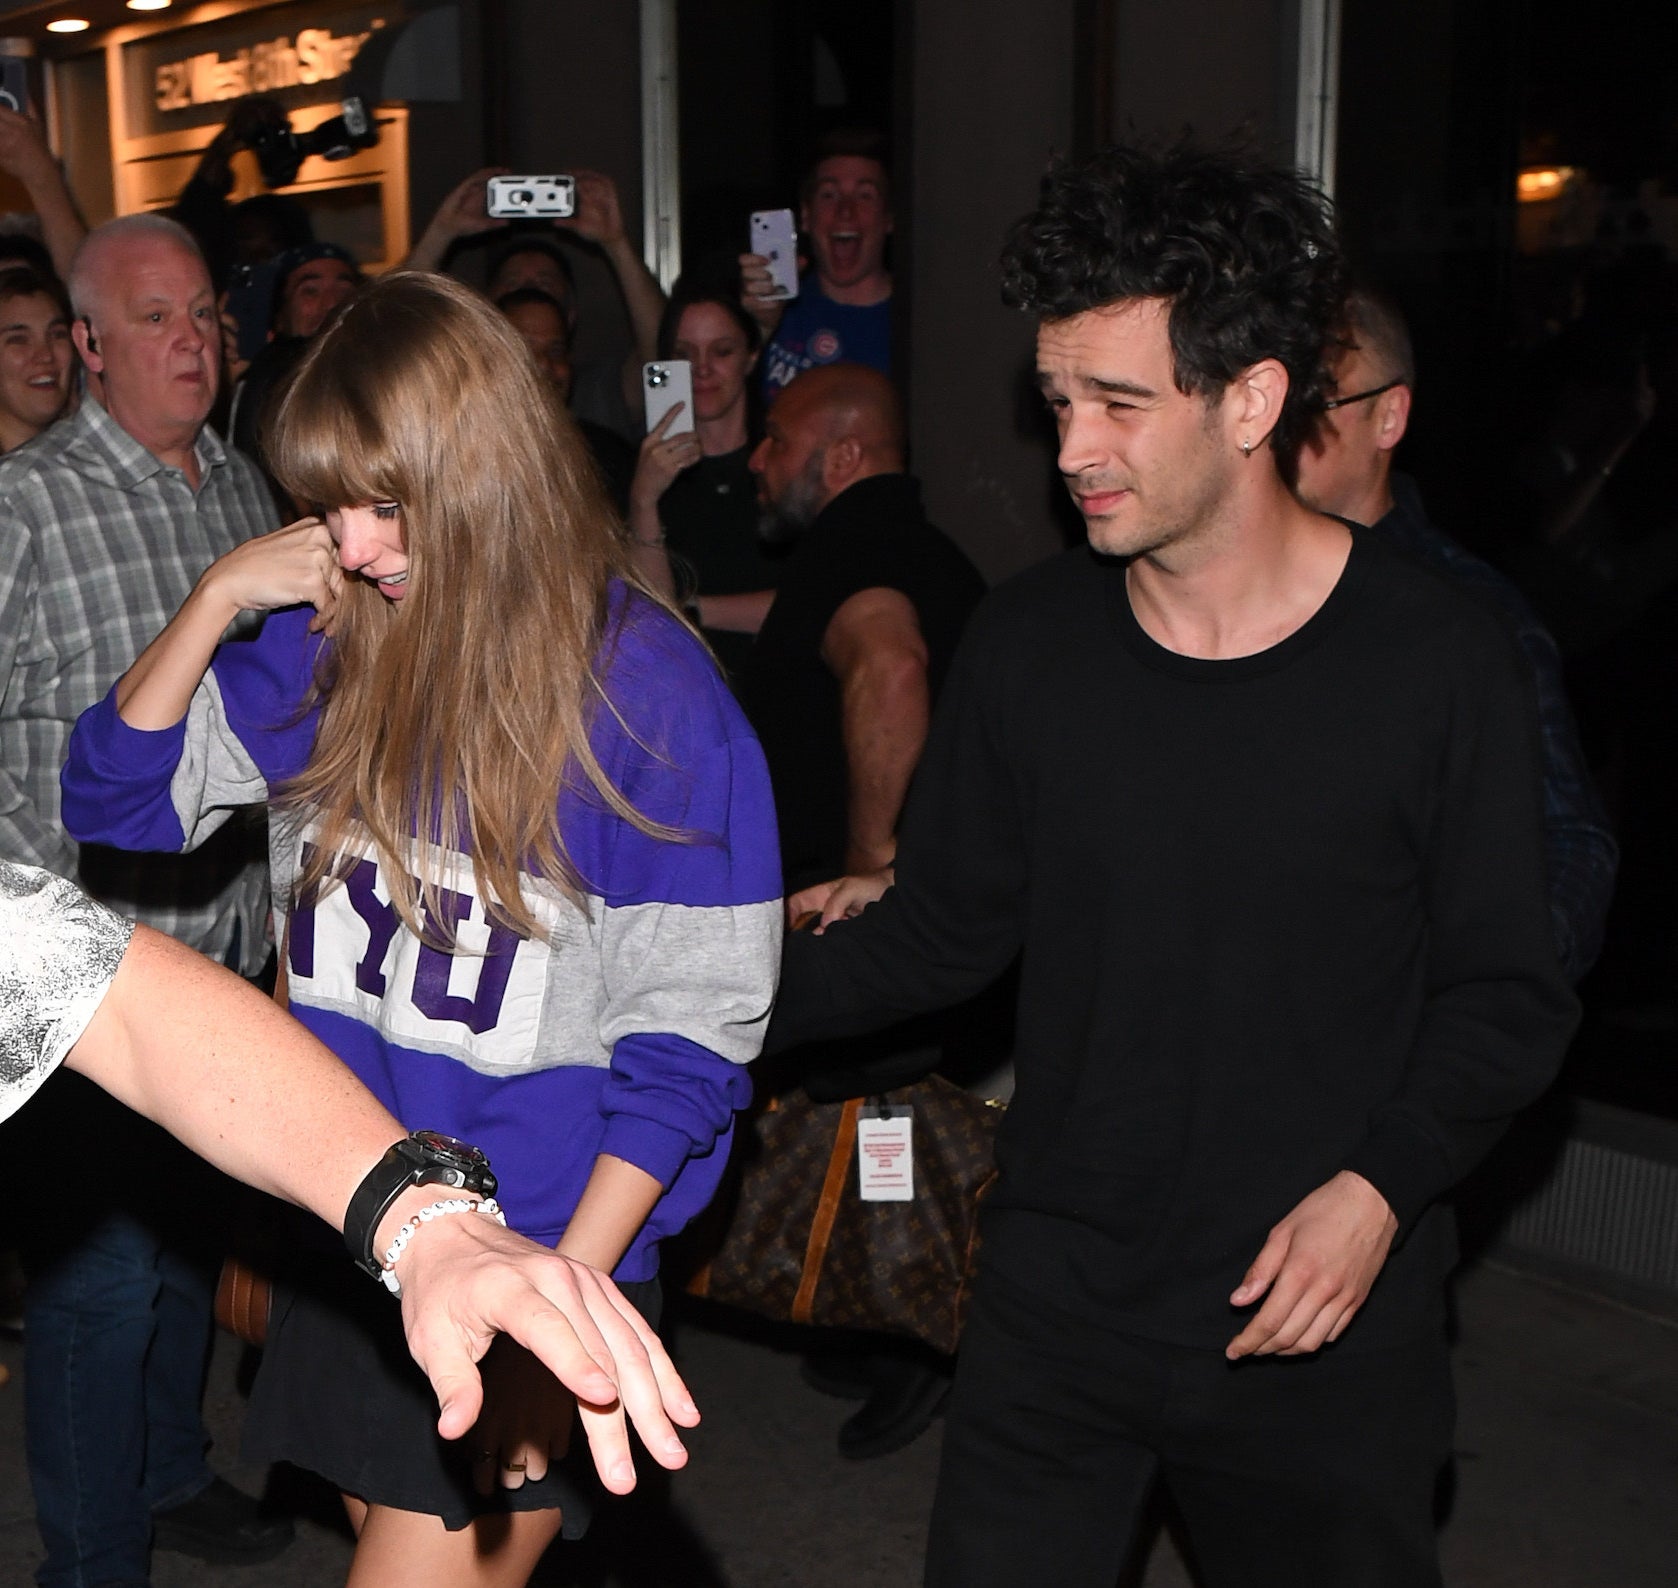 Taylor and Matty walking together